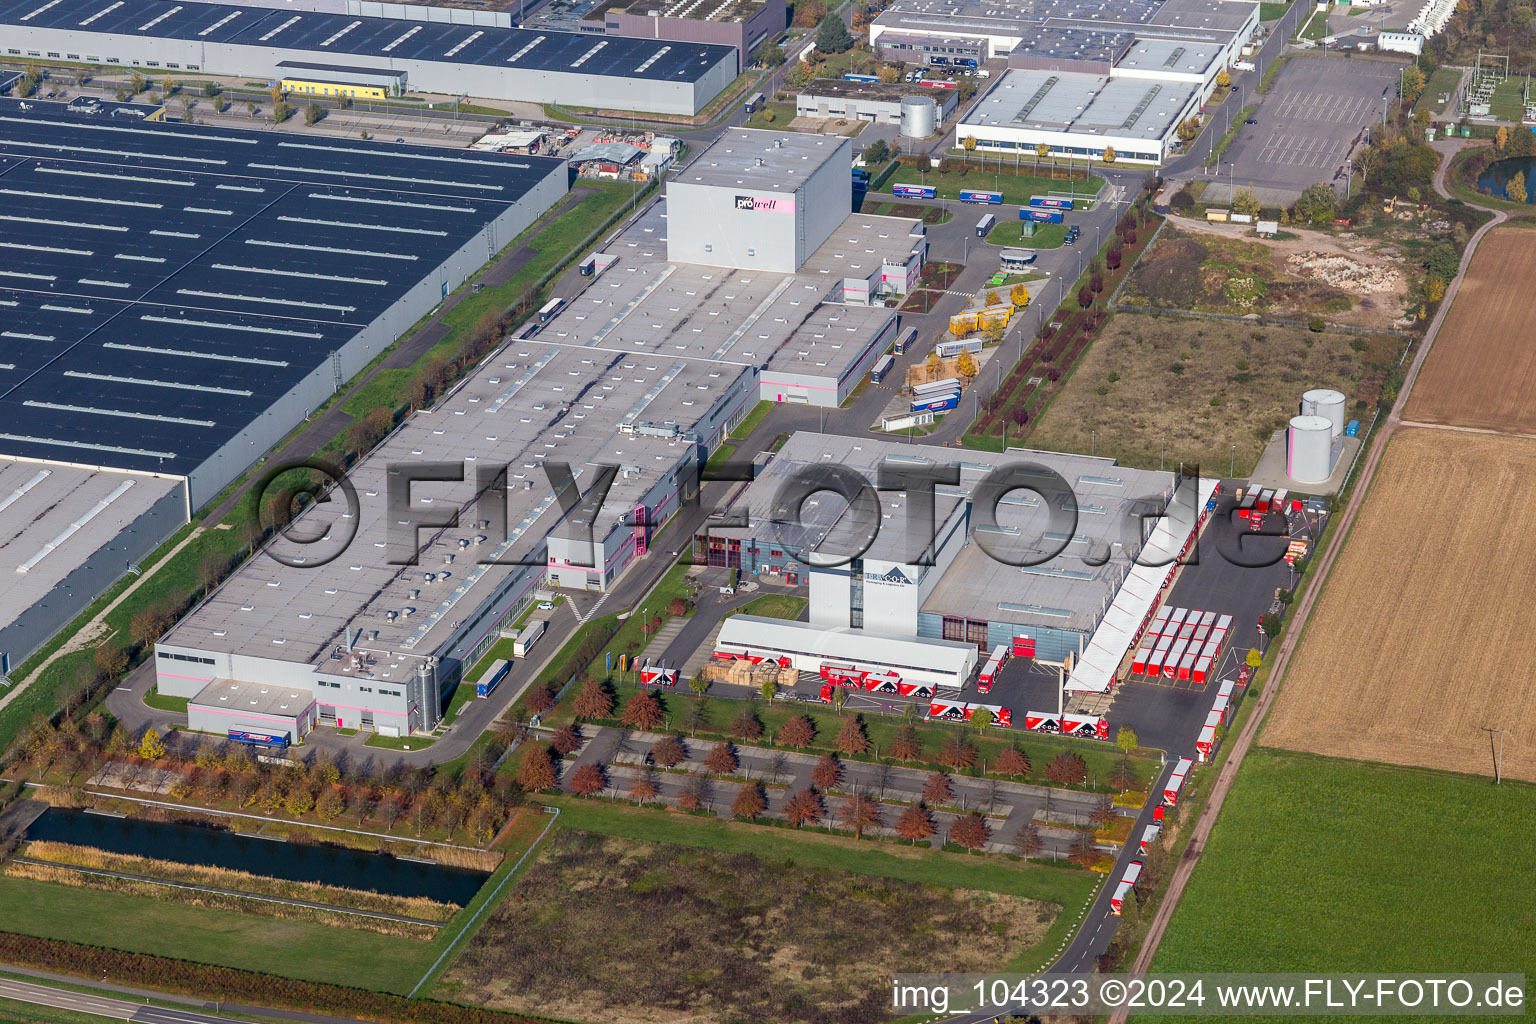 Aerial view of Warehouses and forwarding building of Tricor Packaging & Logistics AG in Offenbach an der Queich in the state Rhineland-Palatinate, Germany